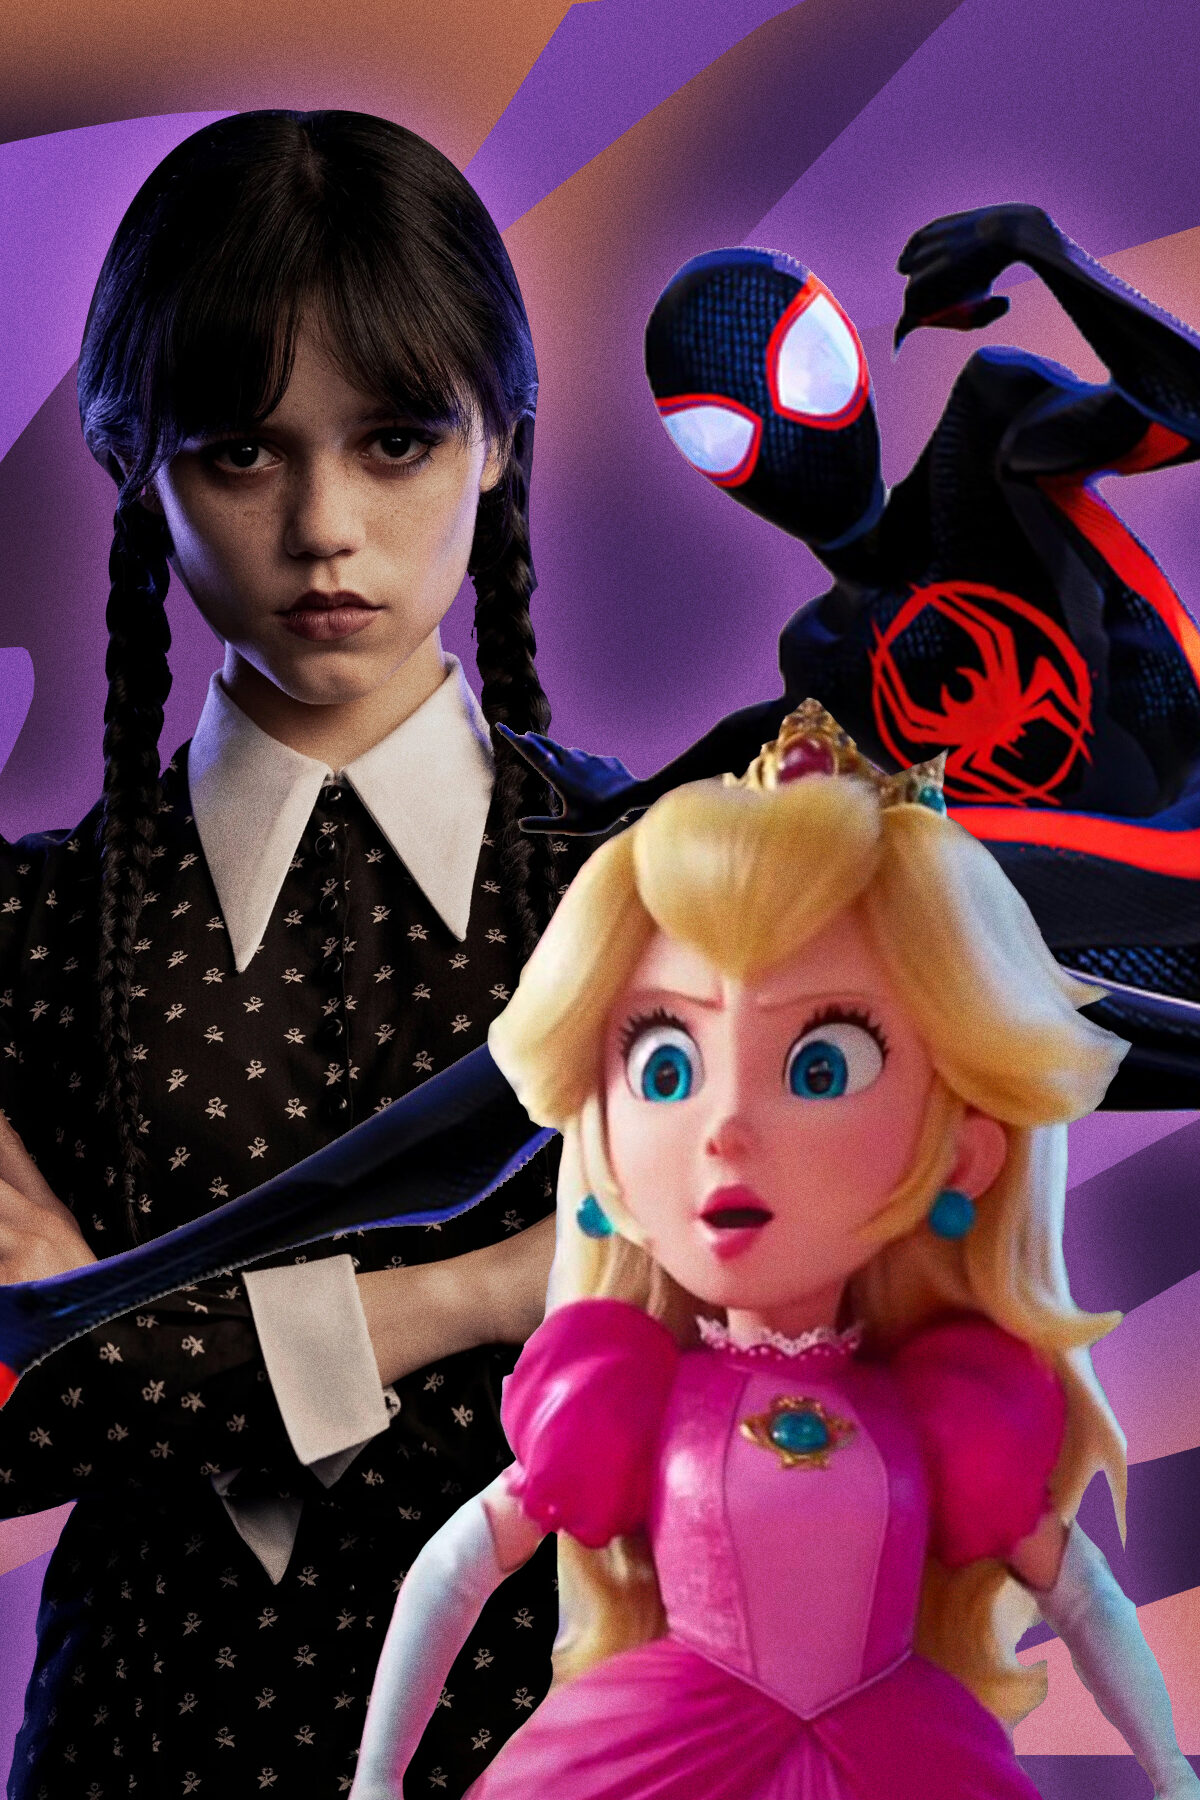 Wednesday, Peach, and Miles Morales Spider-Man in our Halloween Costume Ideas for Movies and TV